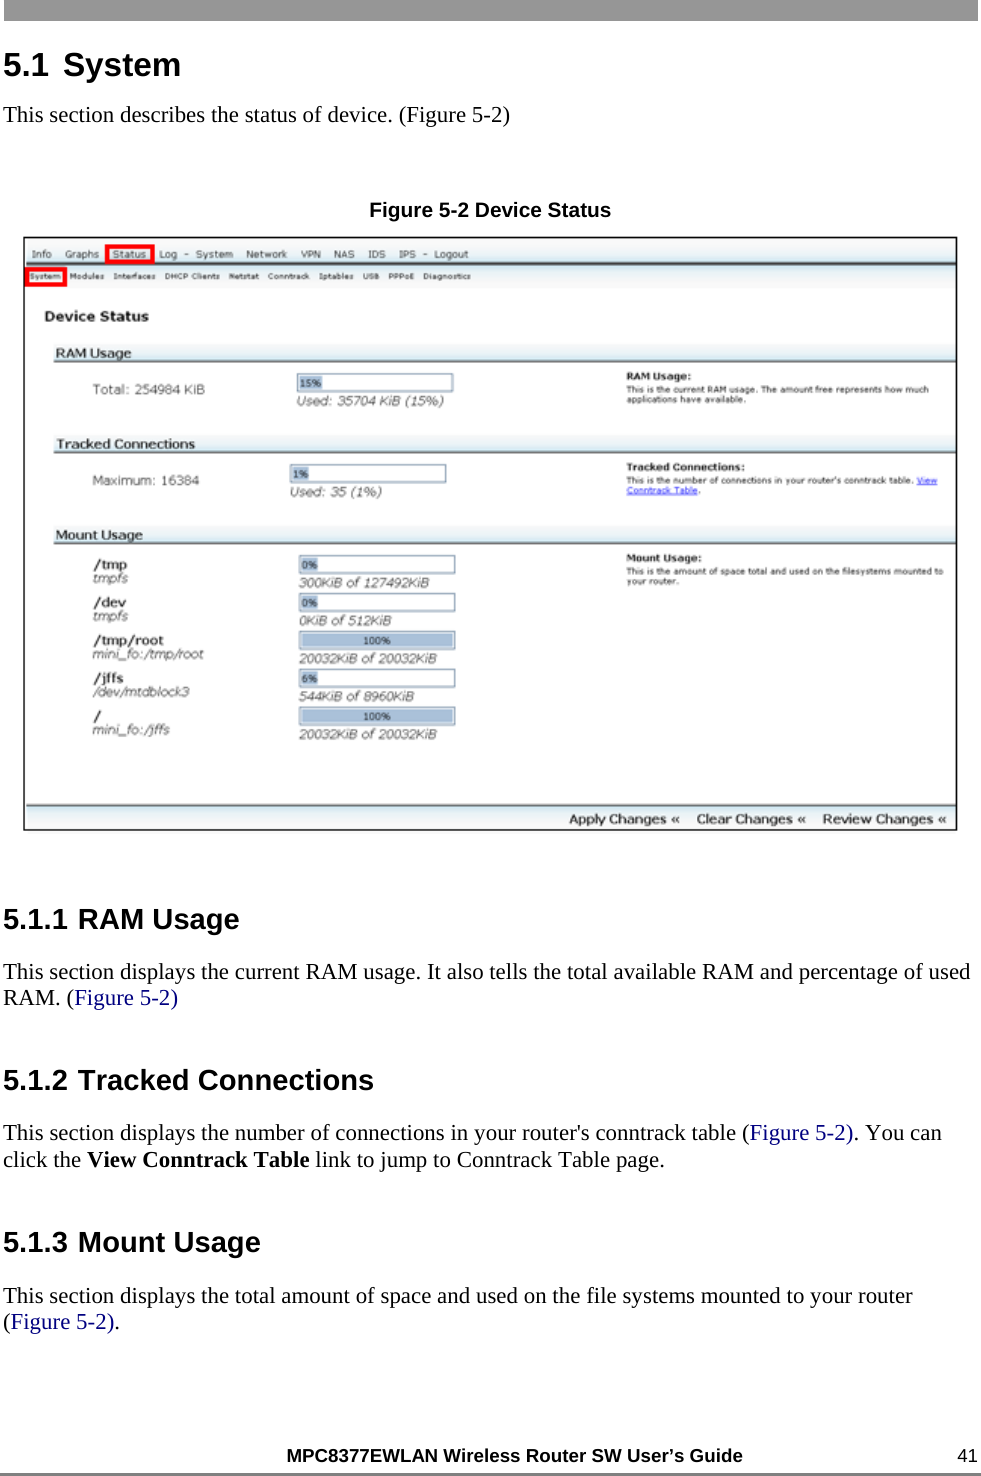                                                          MPC8377EWLAN Wireless Router SW User’s Guide    41 5.1 System This section describes the status of device. (Figure 5-2)  Figure 5-2 Device Status  5.1.1 RAM Usage This section displays the current RAM usage. It also tells the total available RAM and percentage of used RAM. (Figure 5-2) 5.1.2 Tracked Connections This section displays the number of connections in your router&apos;s conntrack table (Figure 5-2). You can click the View Conntrack Table link to jump to Conntrack Table page. 5.1.3 Mount Usage This section displays the total amount of space and used on the file systems mounted to your router (Figure 5-2). 